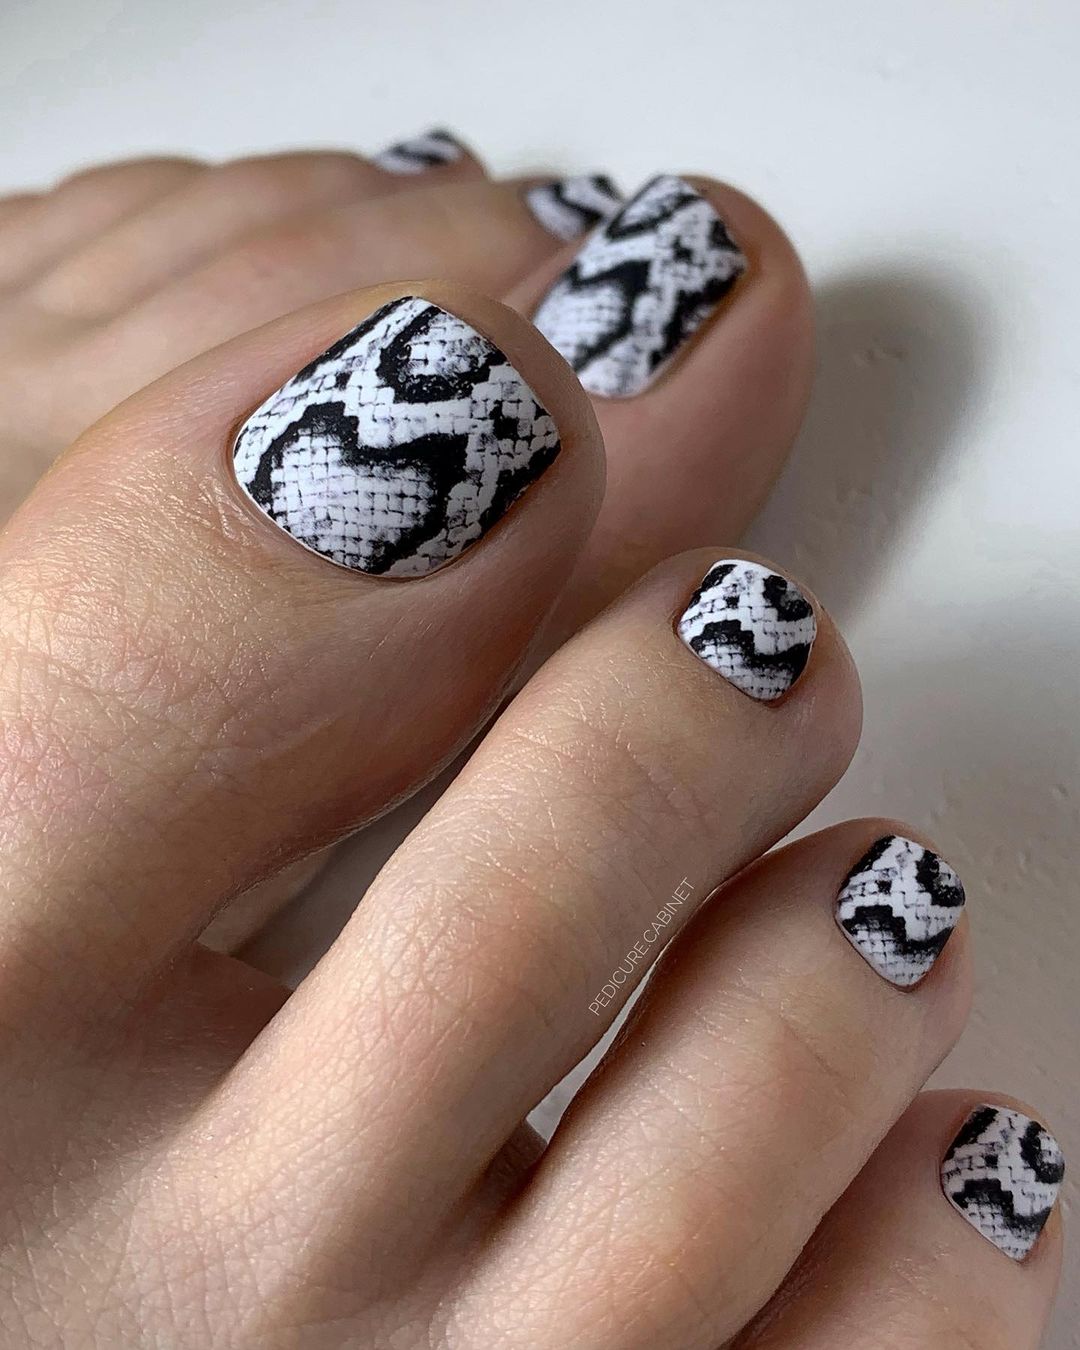 25 Fresh and Chic Summer White Toe Nail Designs for Every Occasion